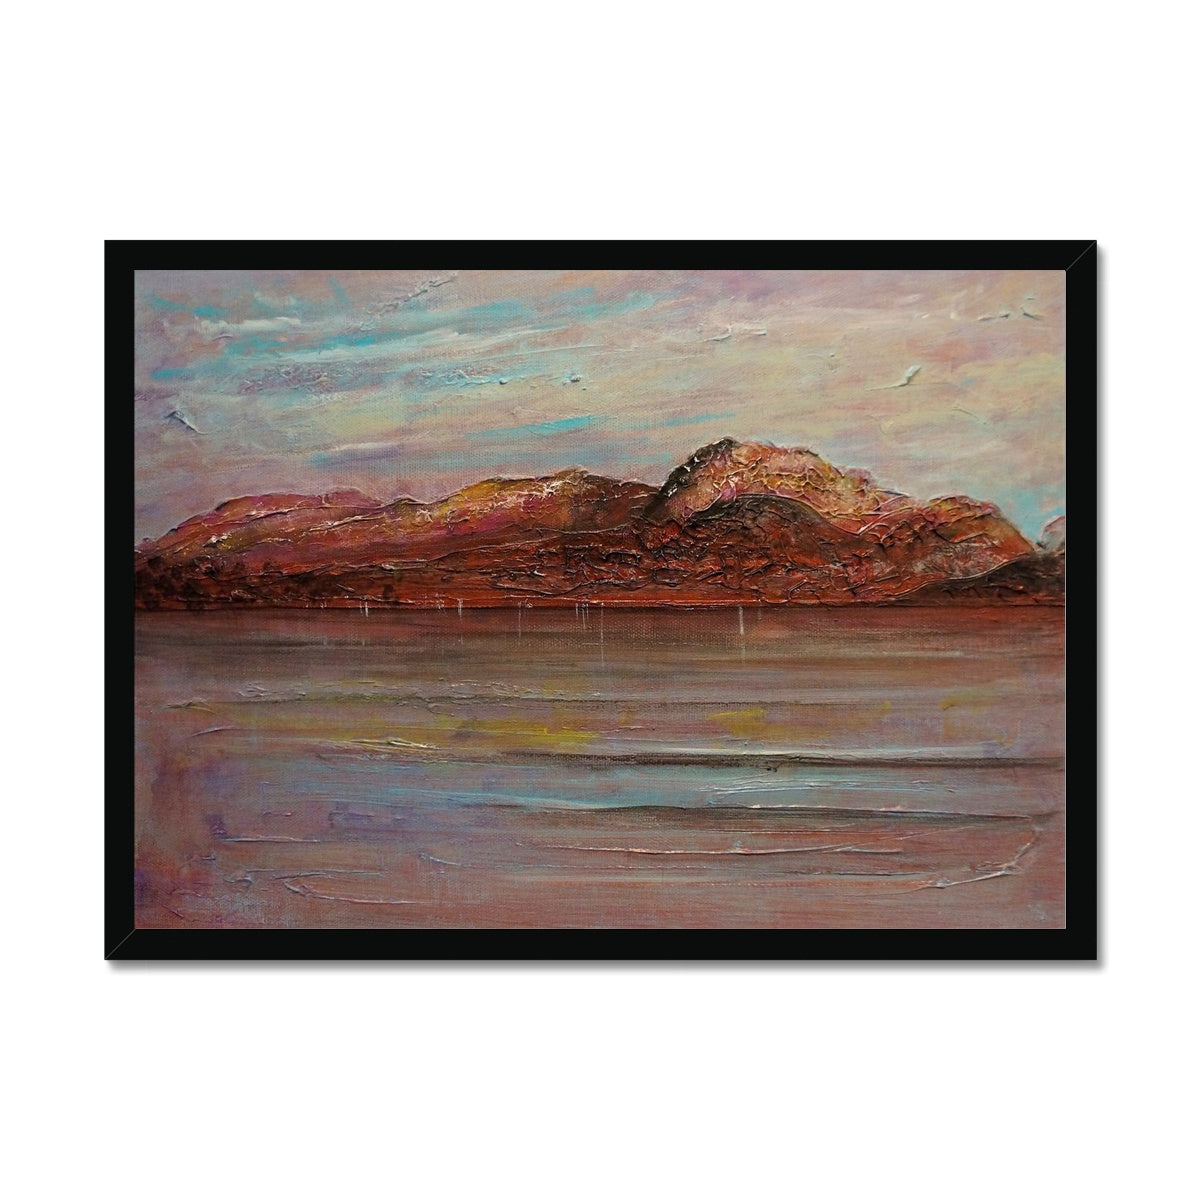 Ben Nevis Painting | Framed Prints From Scotland-Framed Prints-Scottish Lochs & Mountains Art Gallery-A2 Landscape-Black Frame-Paintings, Prints, Homeware, Art Gifts From Scotland By Scottish Artist Kevin Hunter